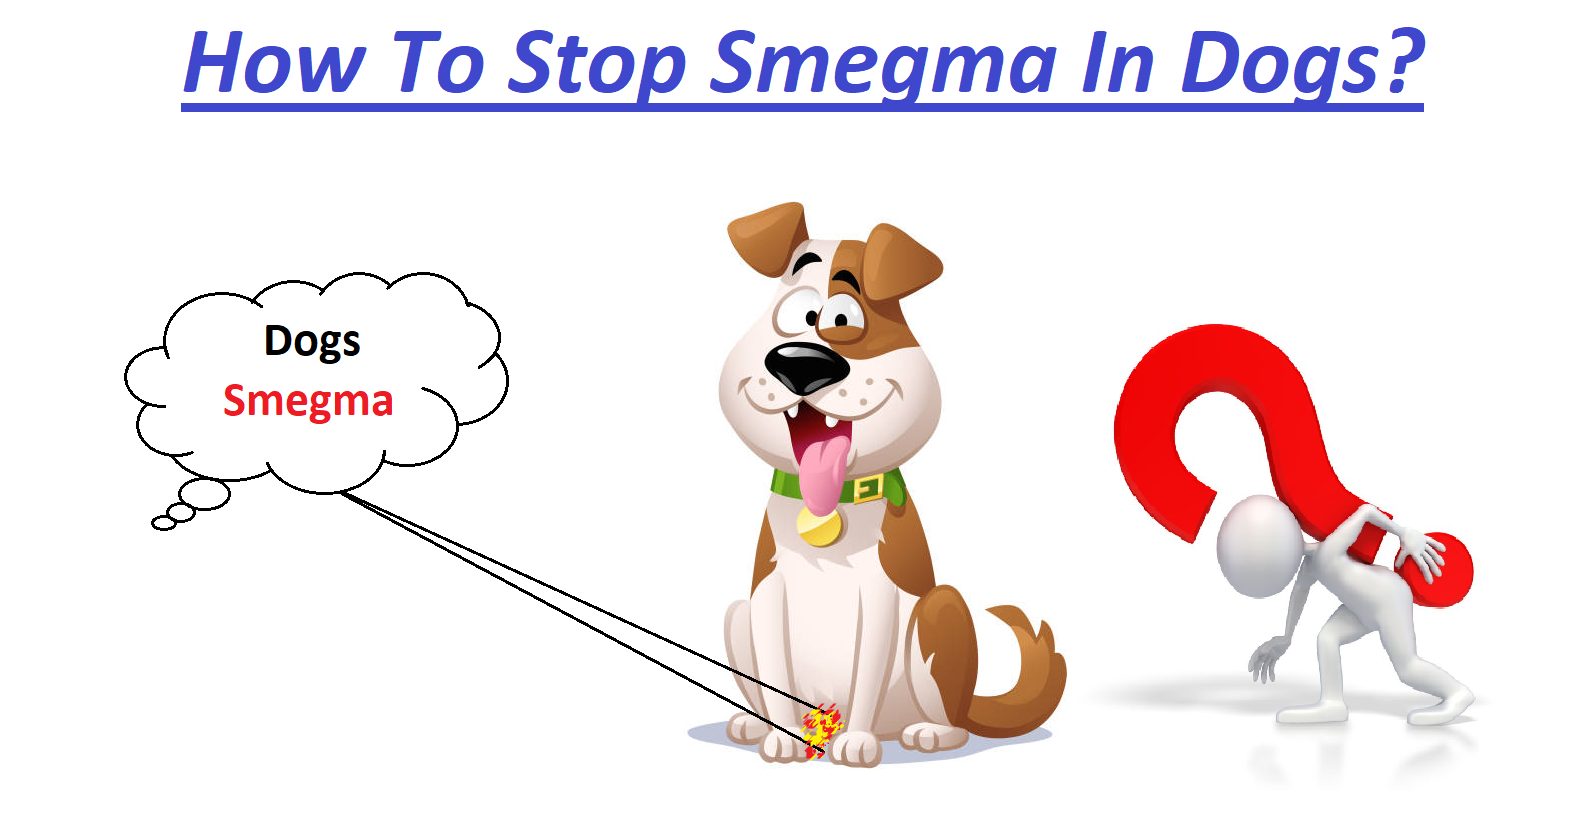 How To Stop Smegma In Dogs?